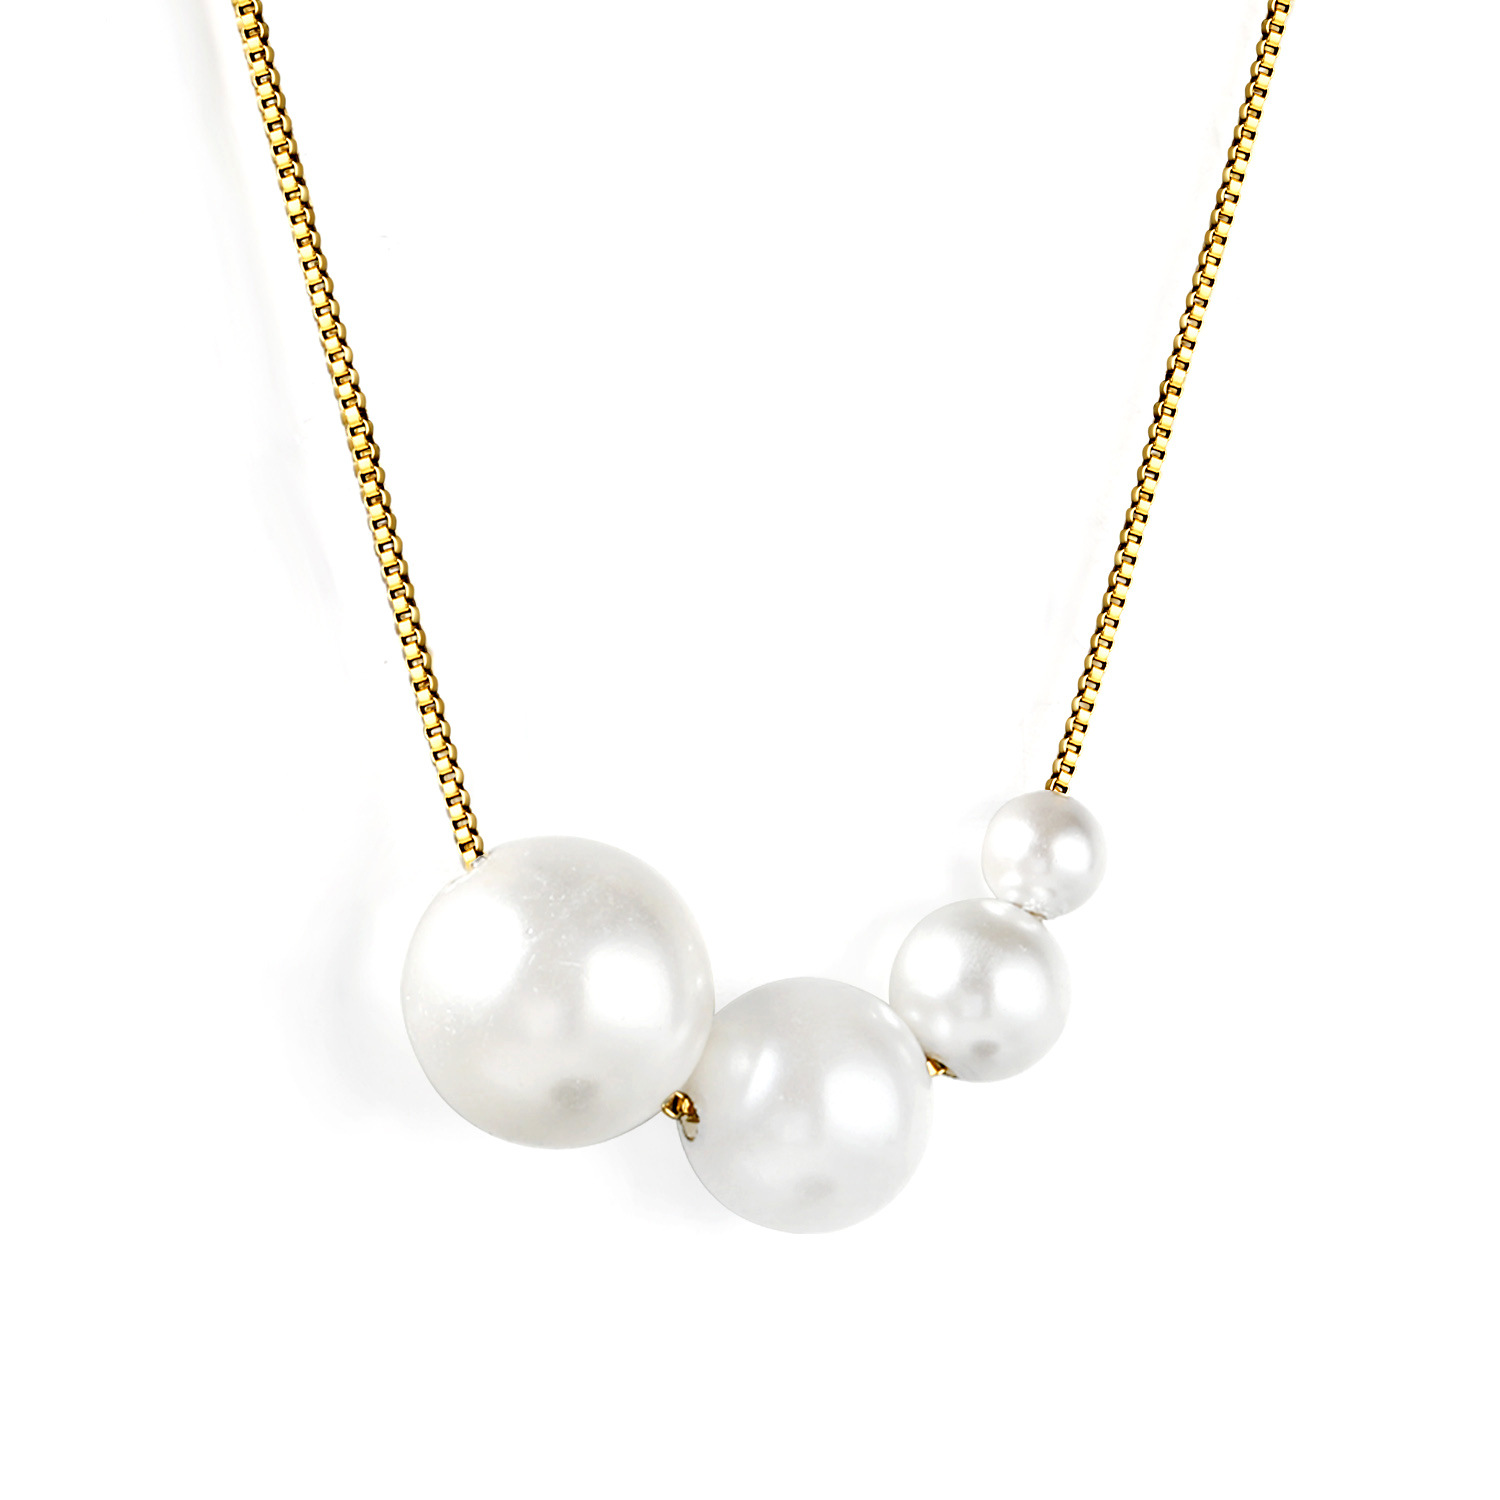 4 size white pearl necklace gold